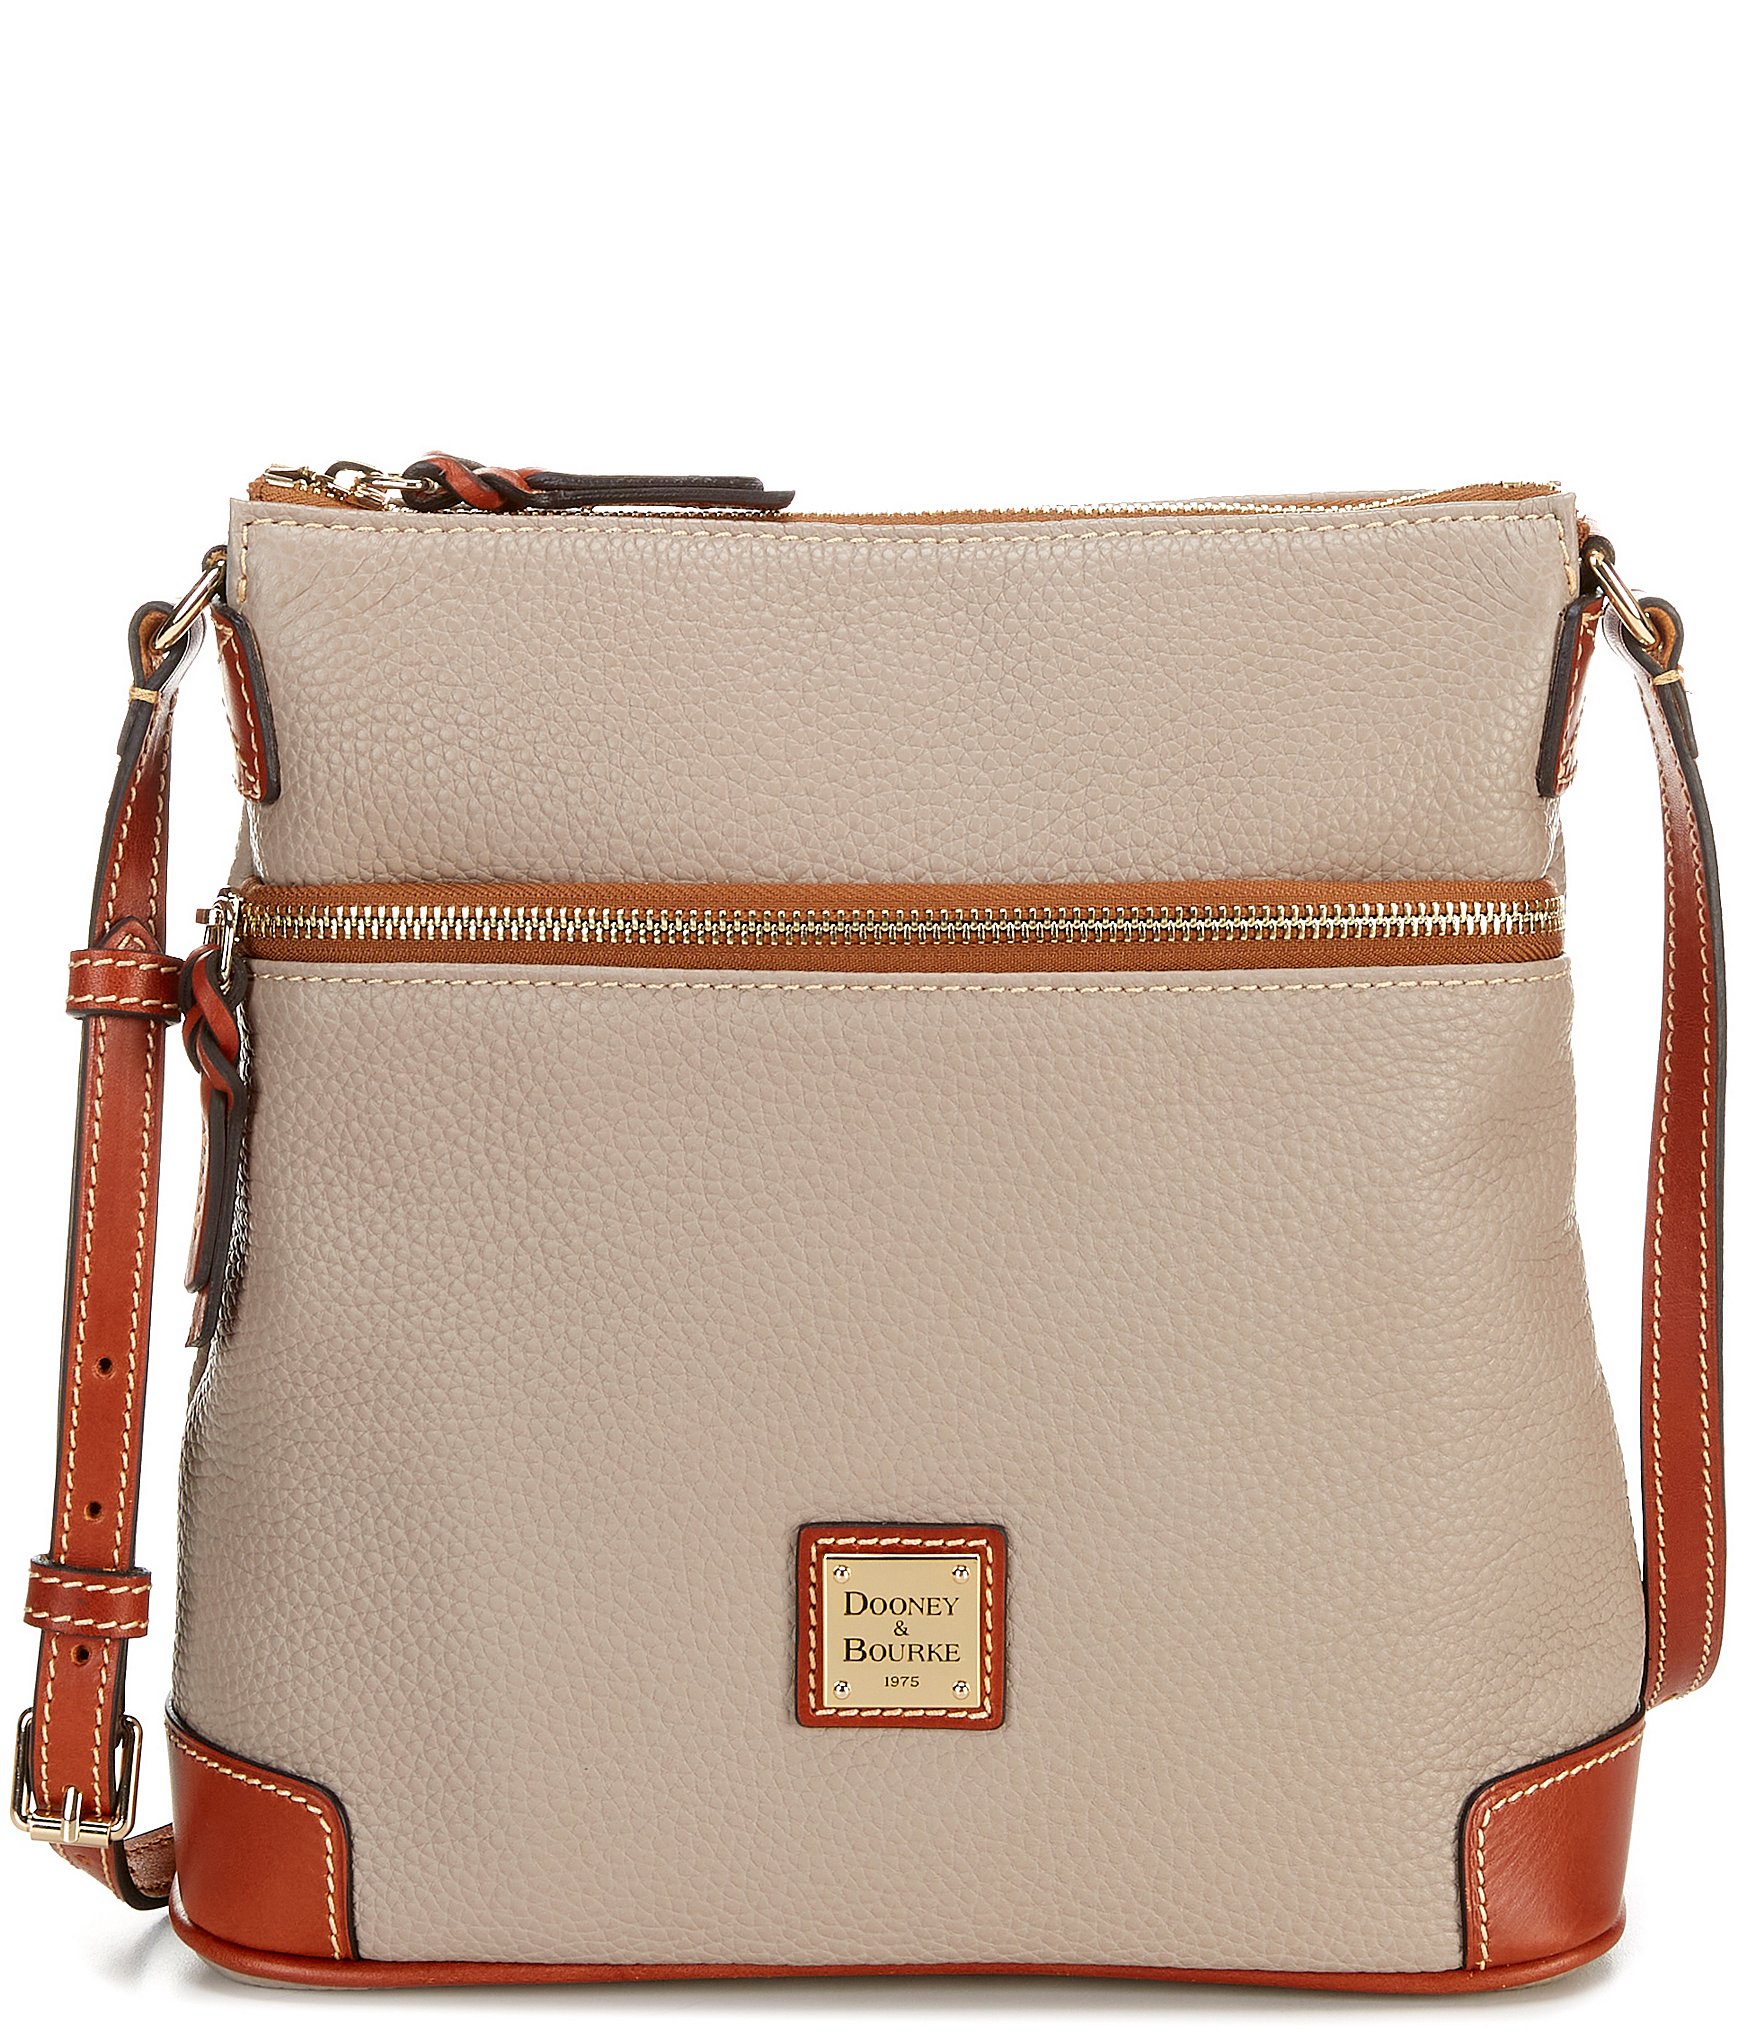 Dooney Bourke Crossbody - clothing & accessories - by owner